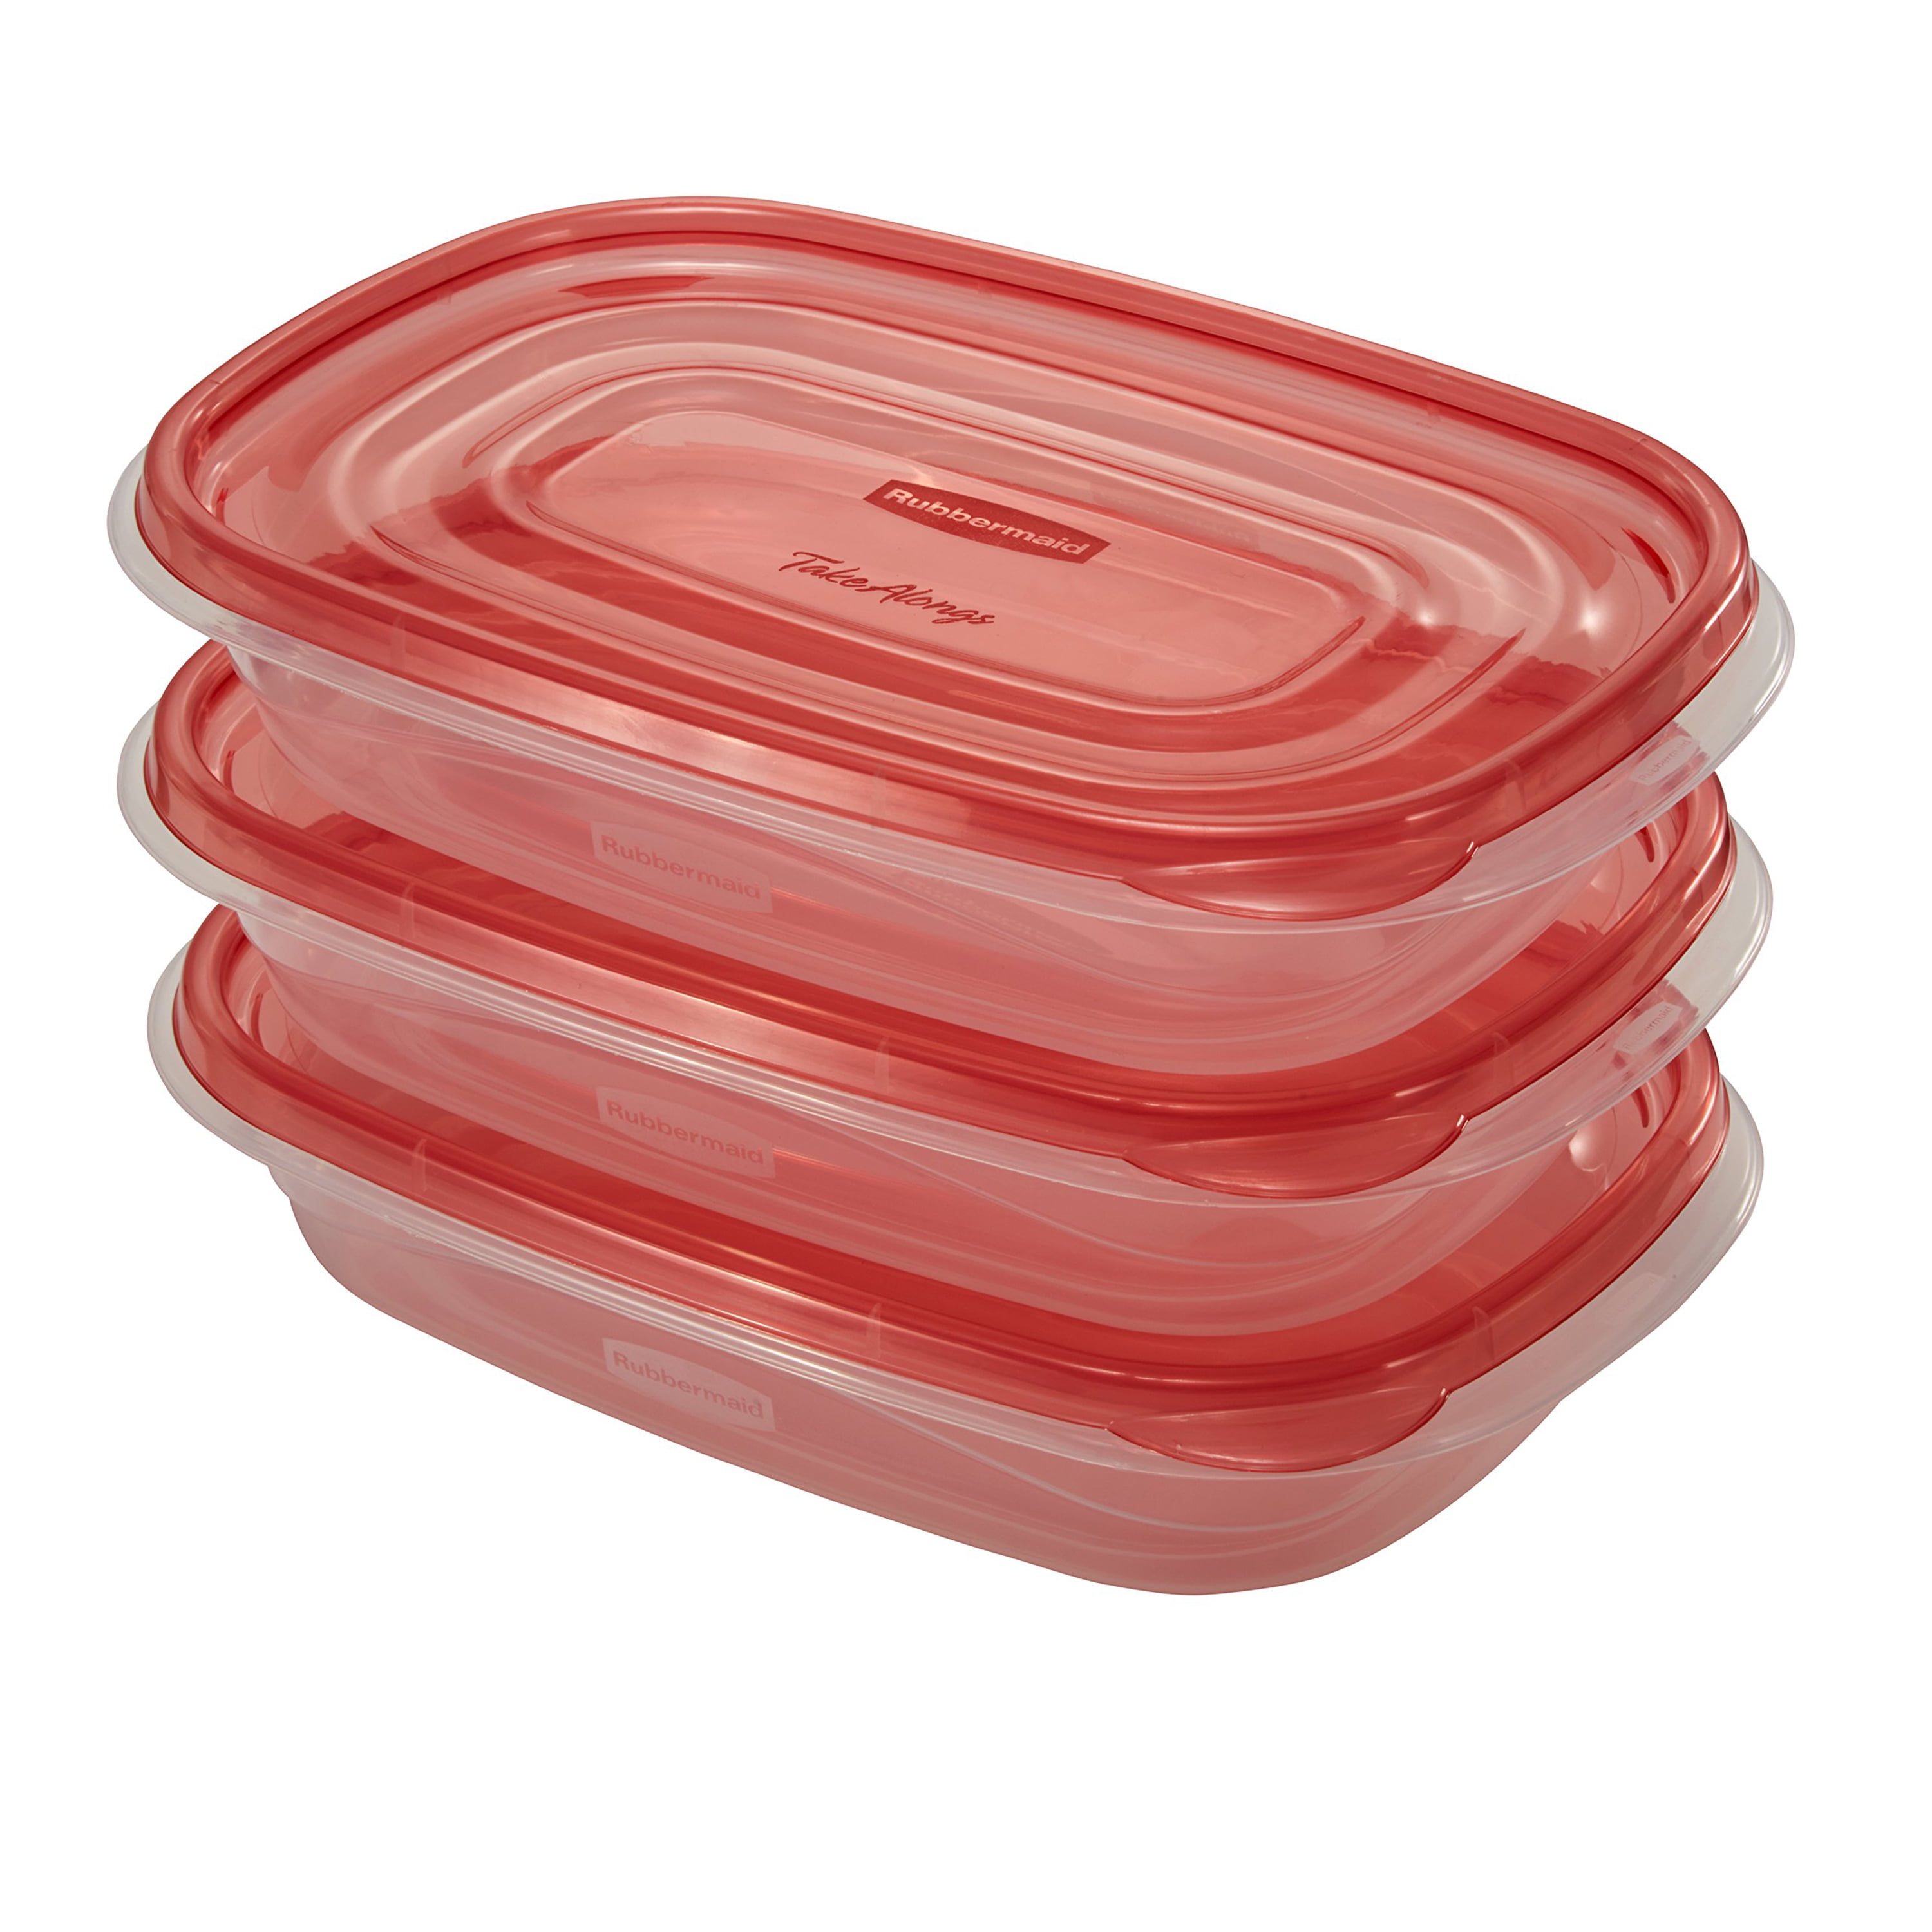 Rubbermaid® Take Alongs Sandwich Containers, 3 pk - Dillons Food Stores